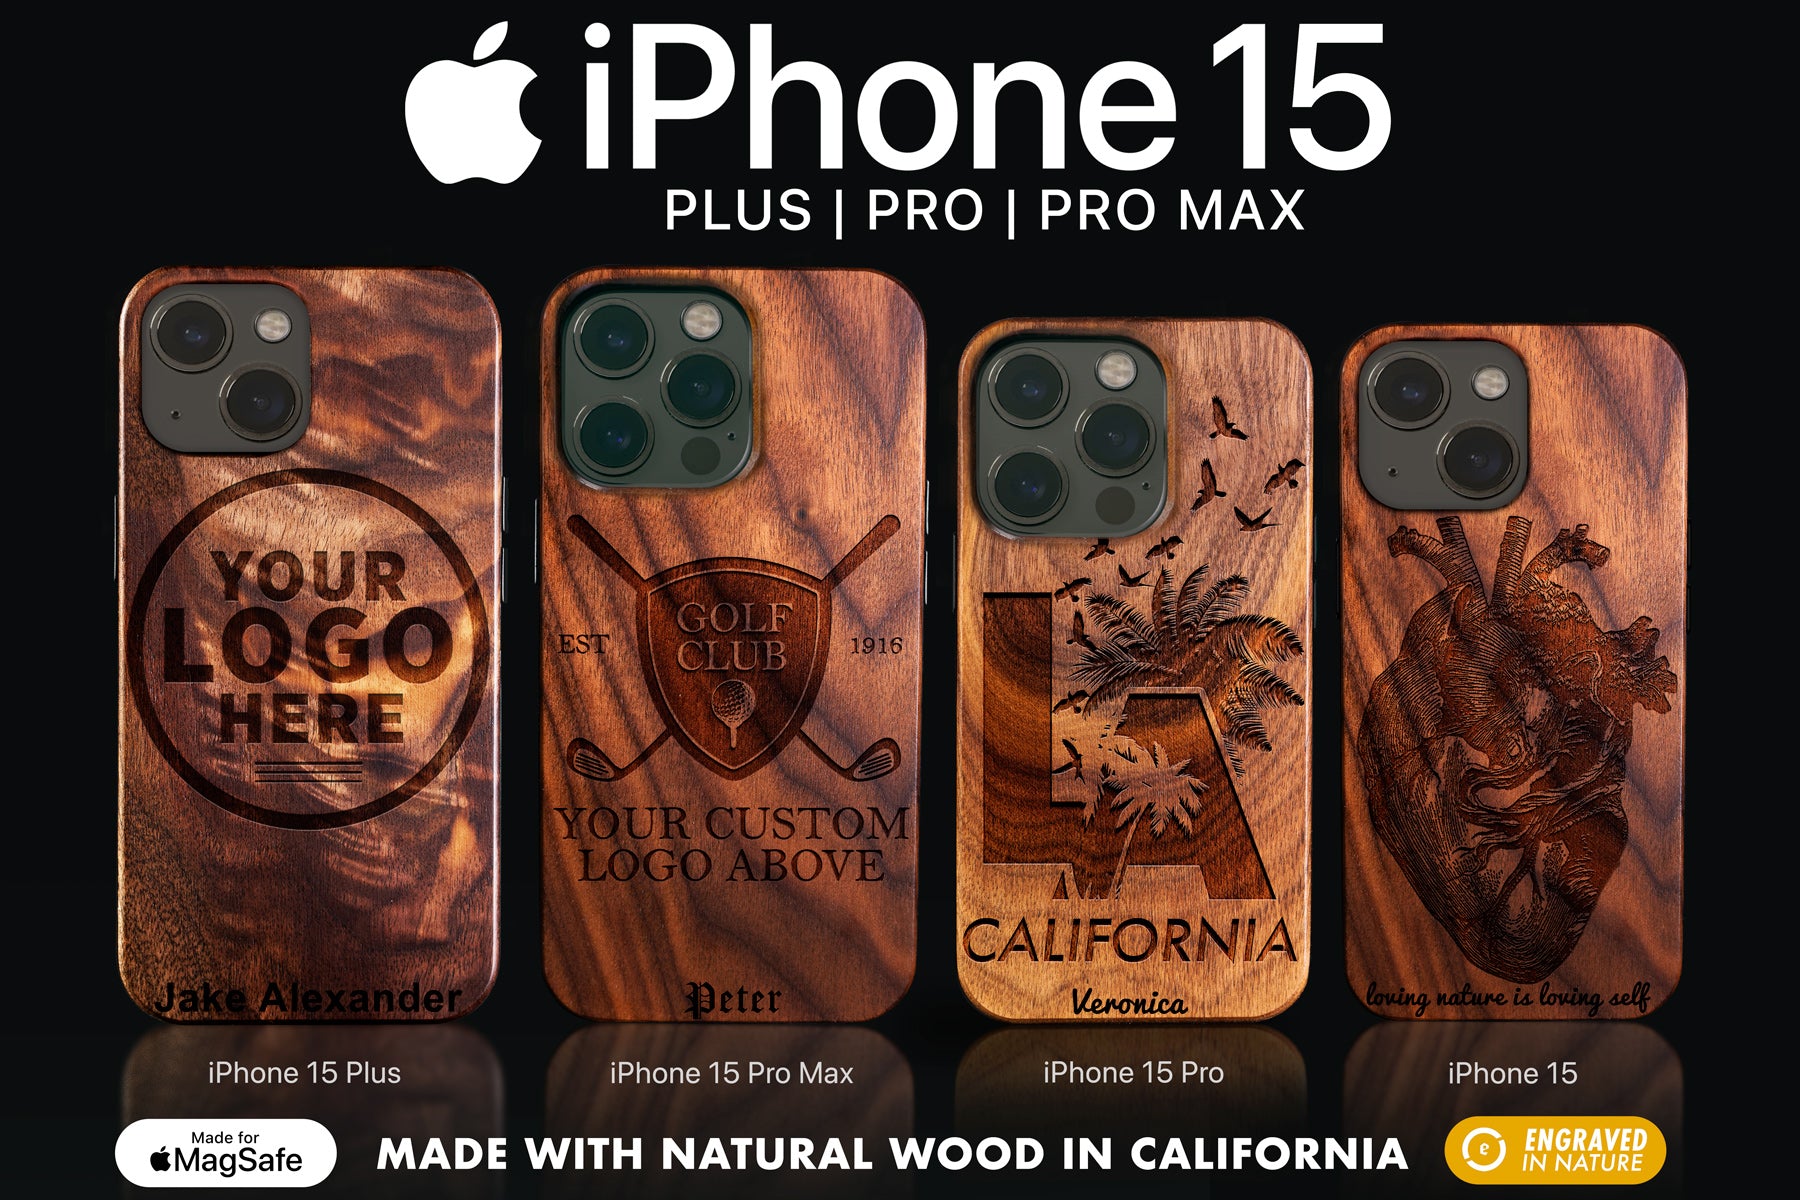 2022 Best iPhone 15 Pro Max Cases - Custom Anime iPhone 15 Pro Max Cases - Customized Monogrammed Wood Carved MagSafe iPhone 15 Pro Max Cover Anime Art iPhone 15 Pro Max Covers | Design Your Own Case by Engraved In Nature